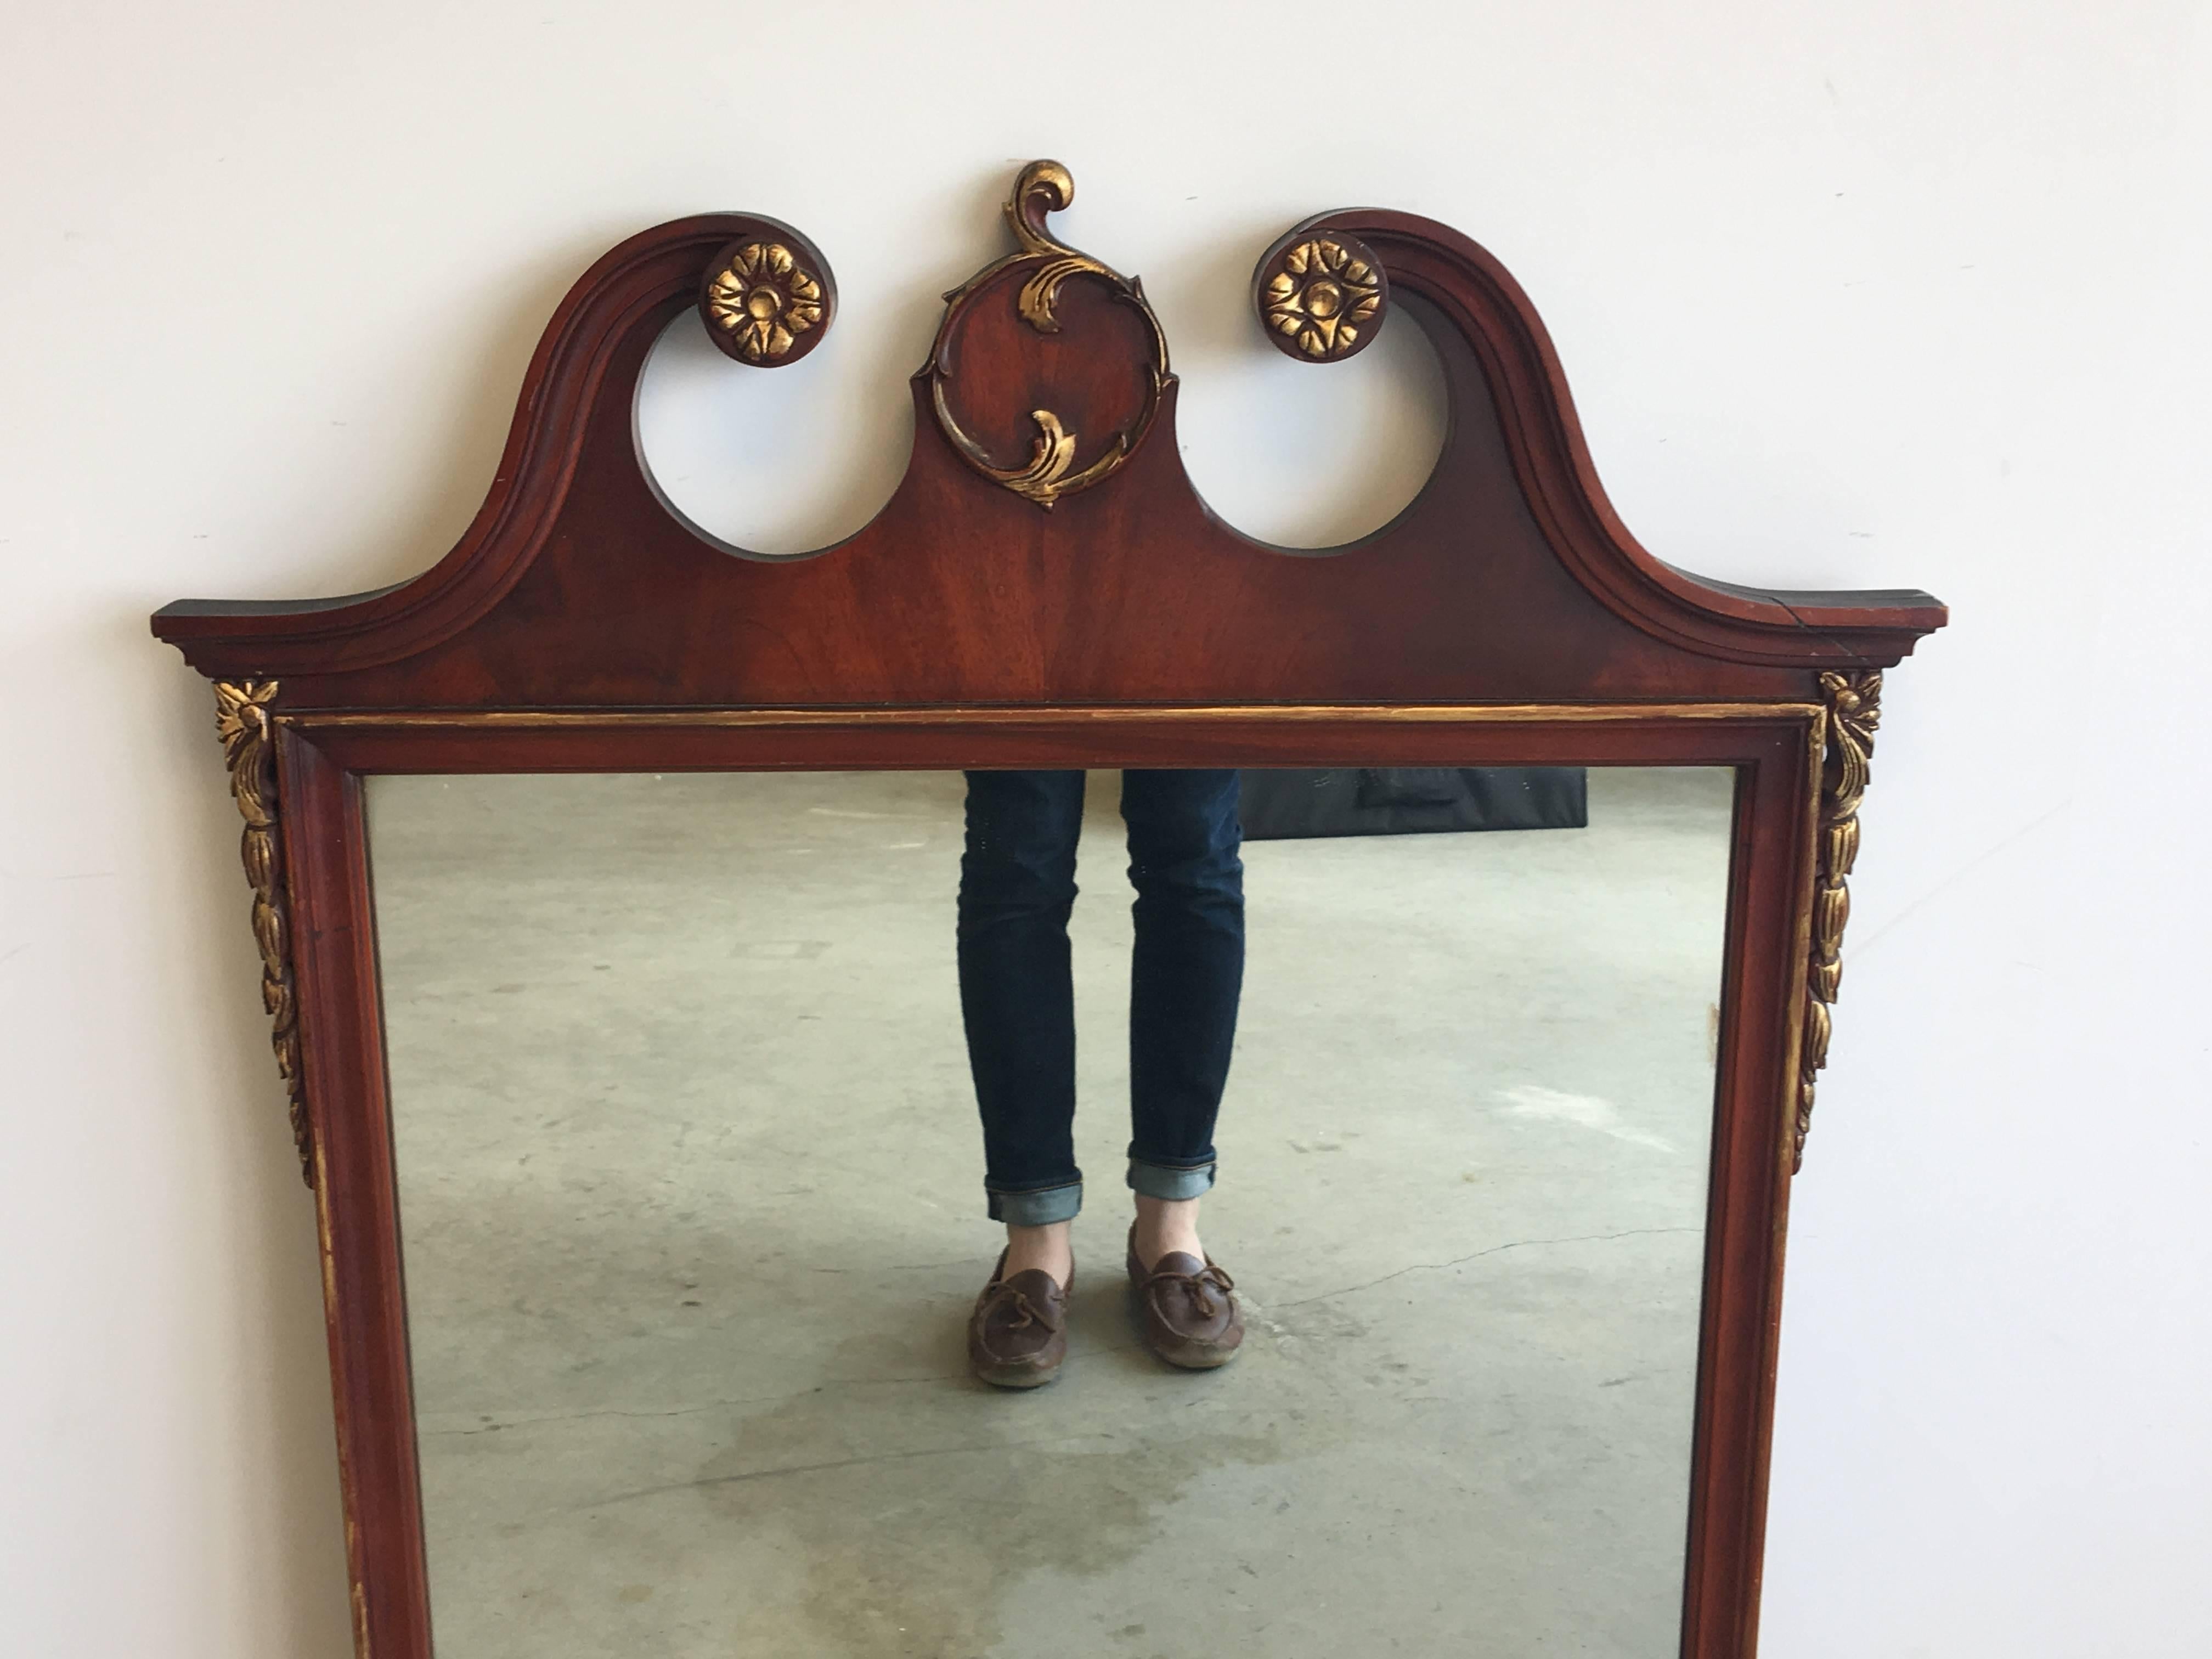 Offered is a gorgeous, 19th century, mahogany and giltwood crest mirror.